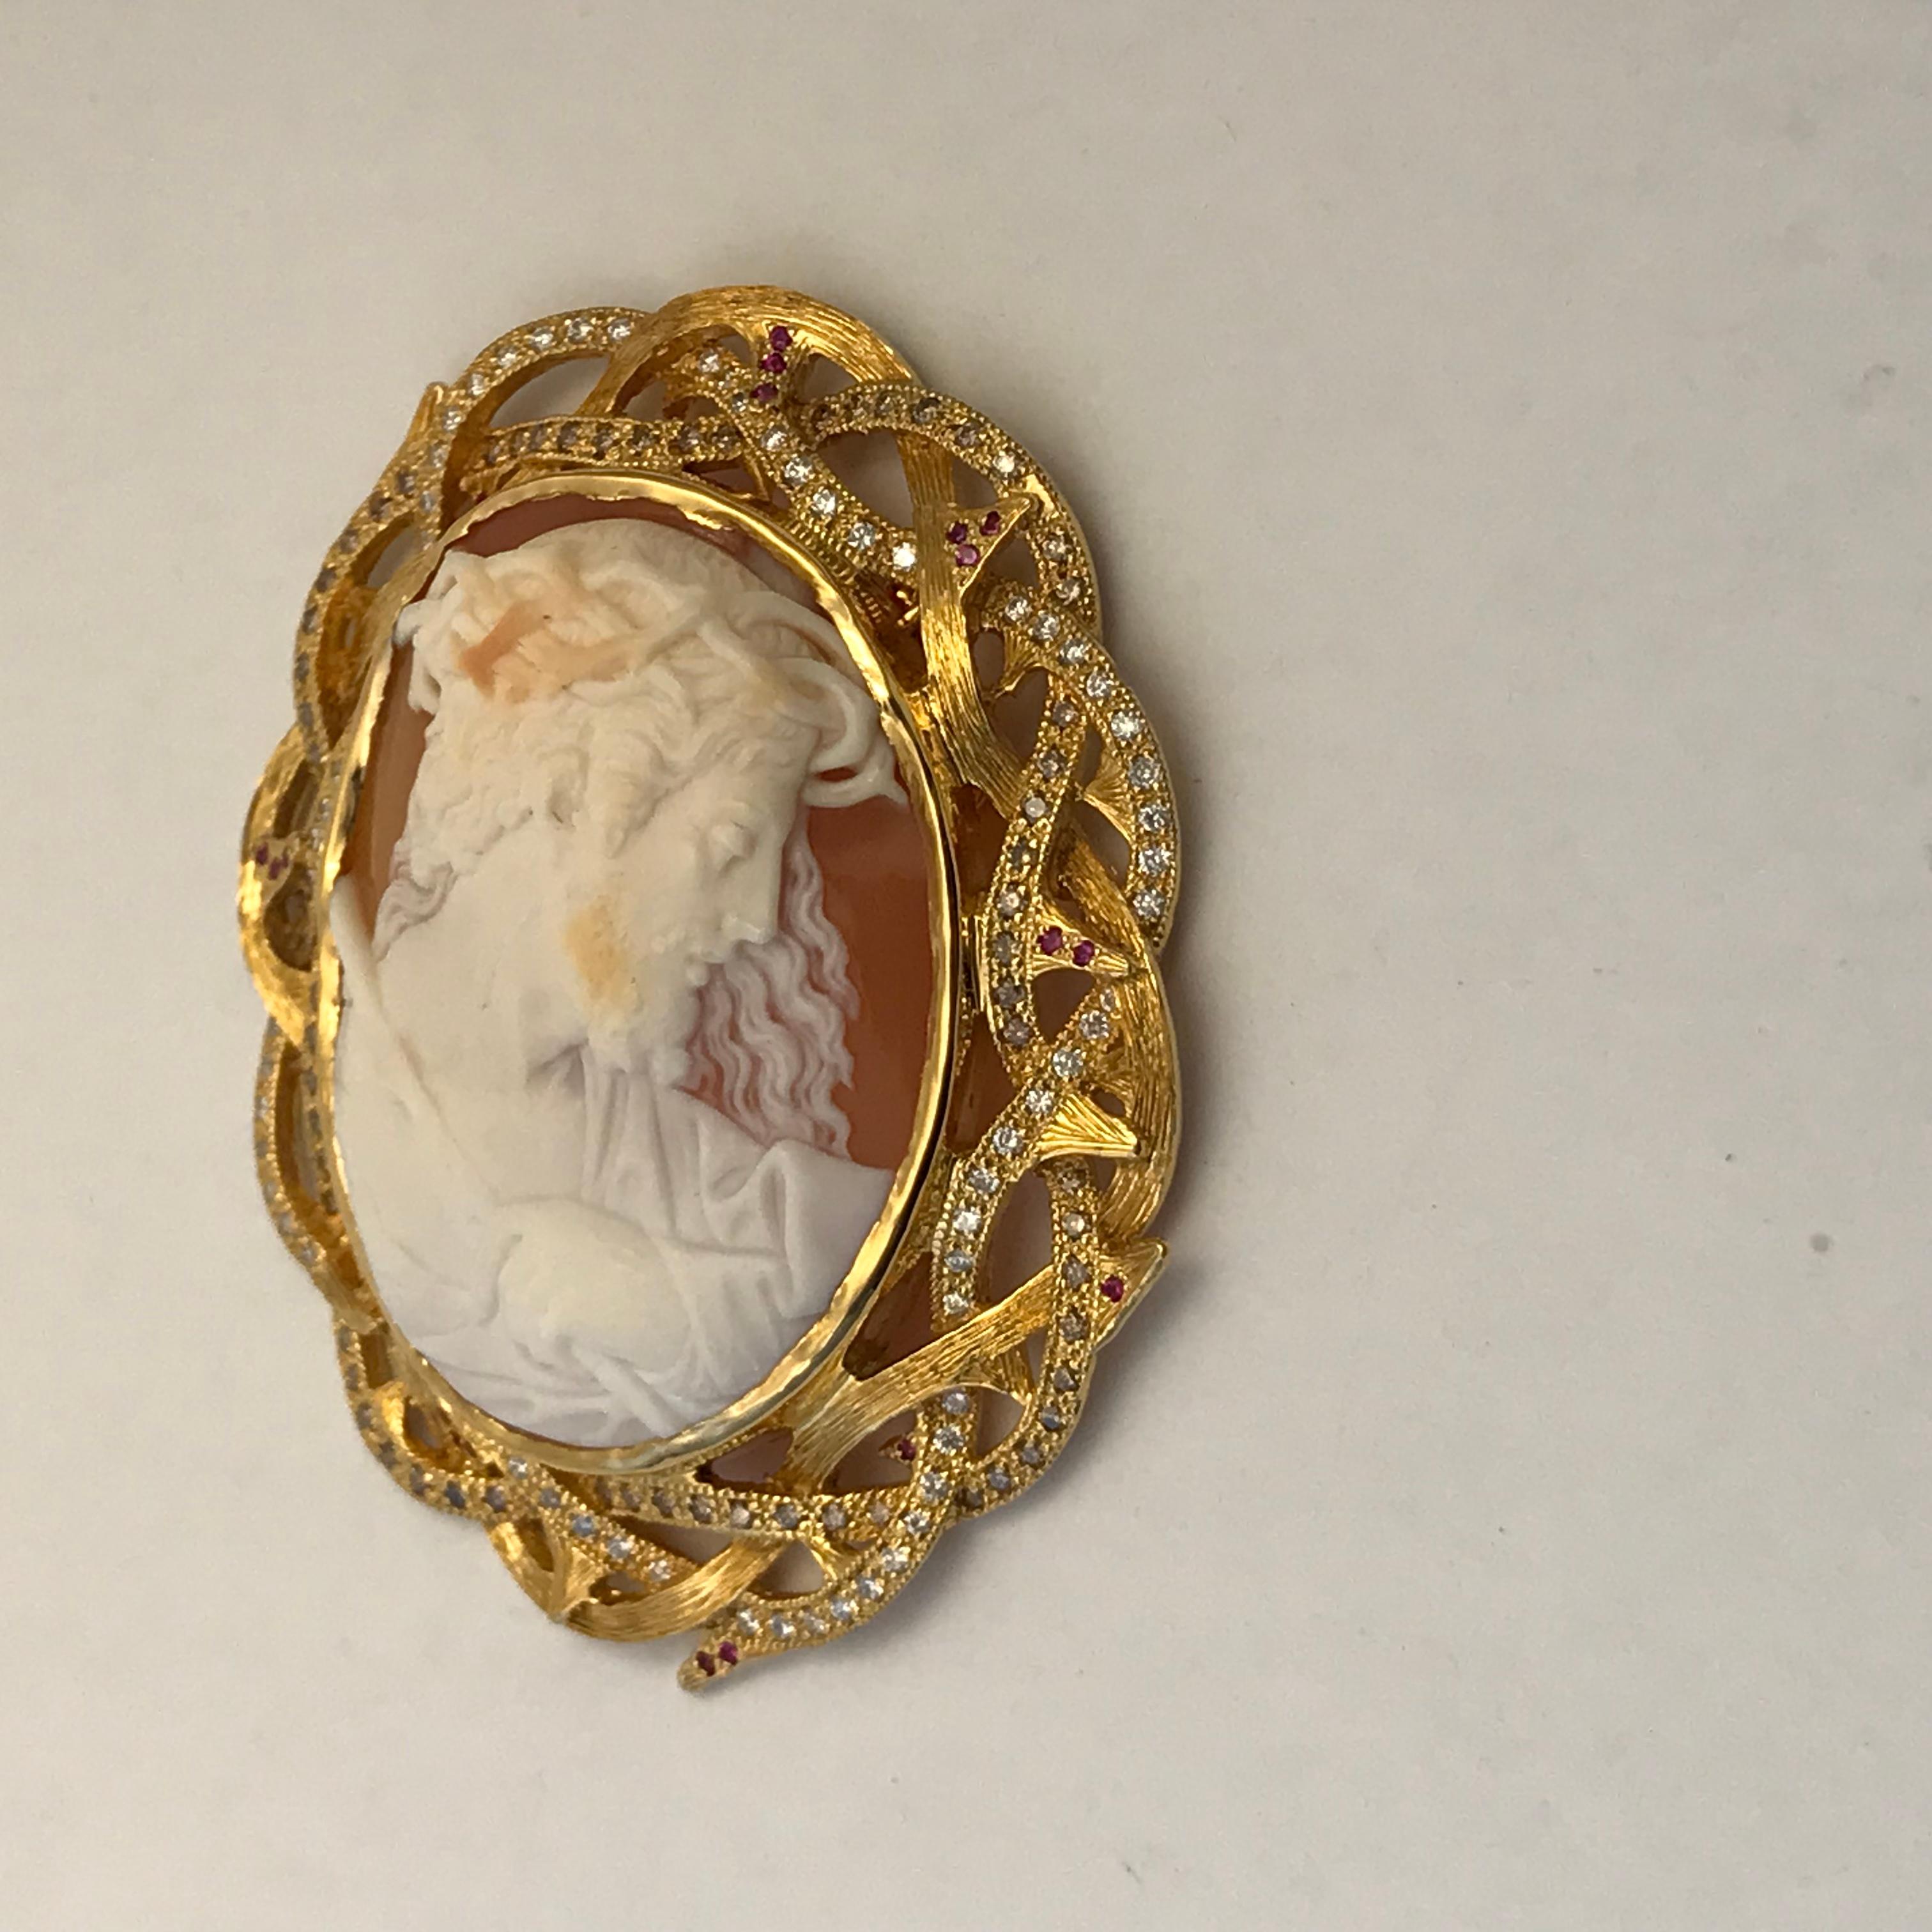 Cameo 1890s Jesus Set in 14 Karat Gold with Diamonds, Rubies and Brown Diamonds For Sale 1